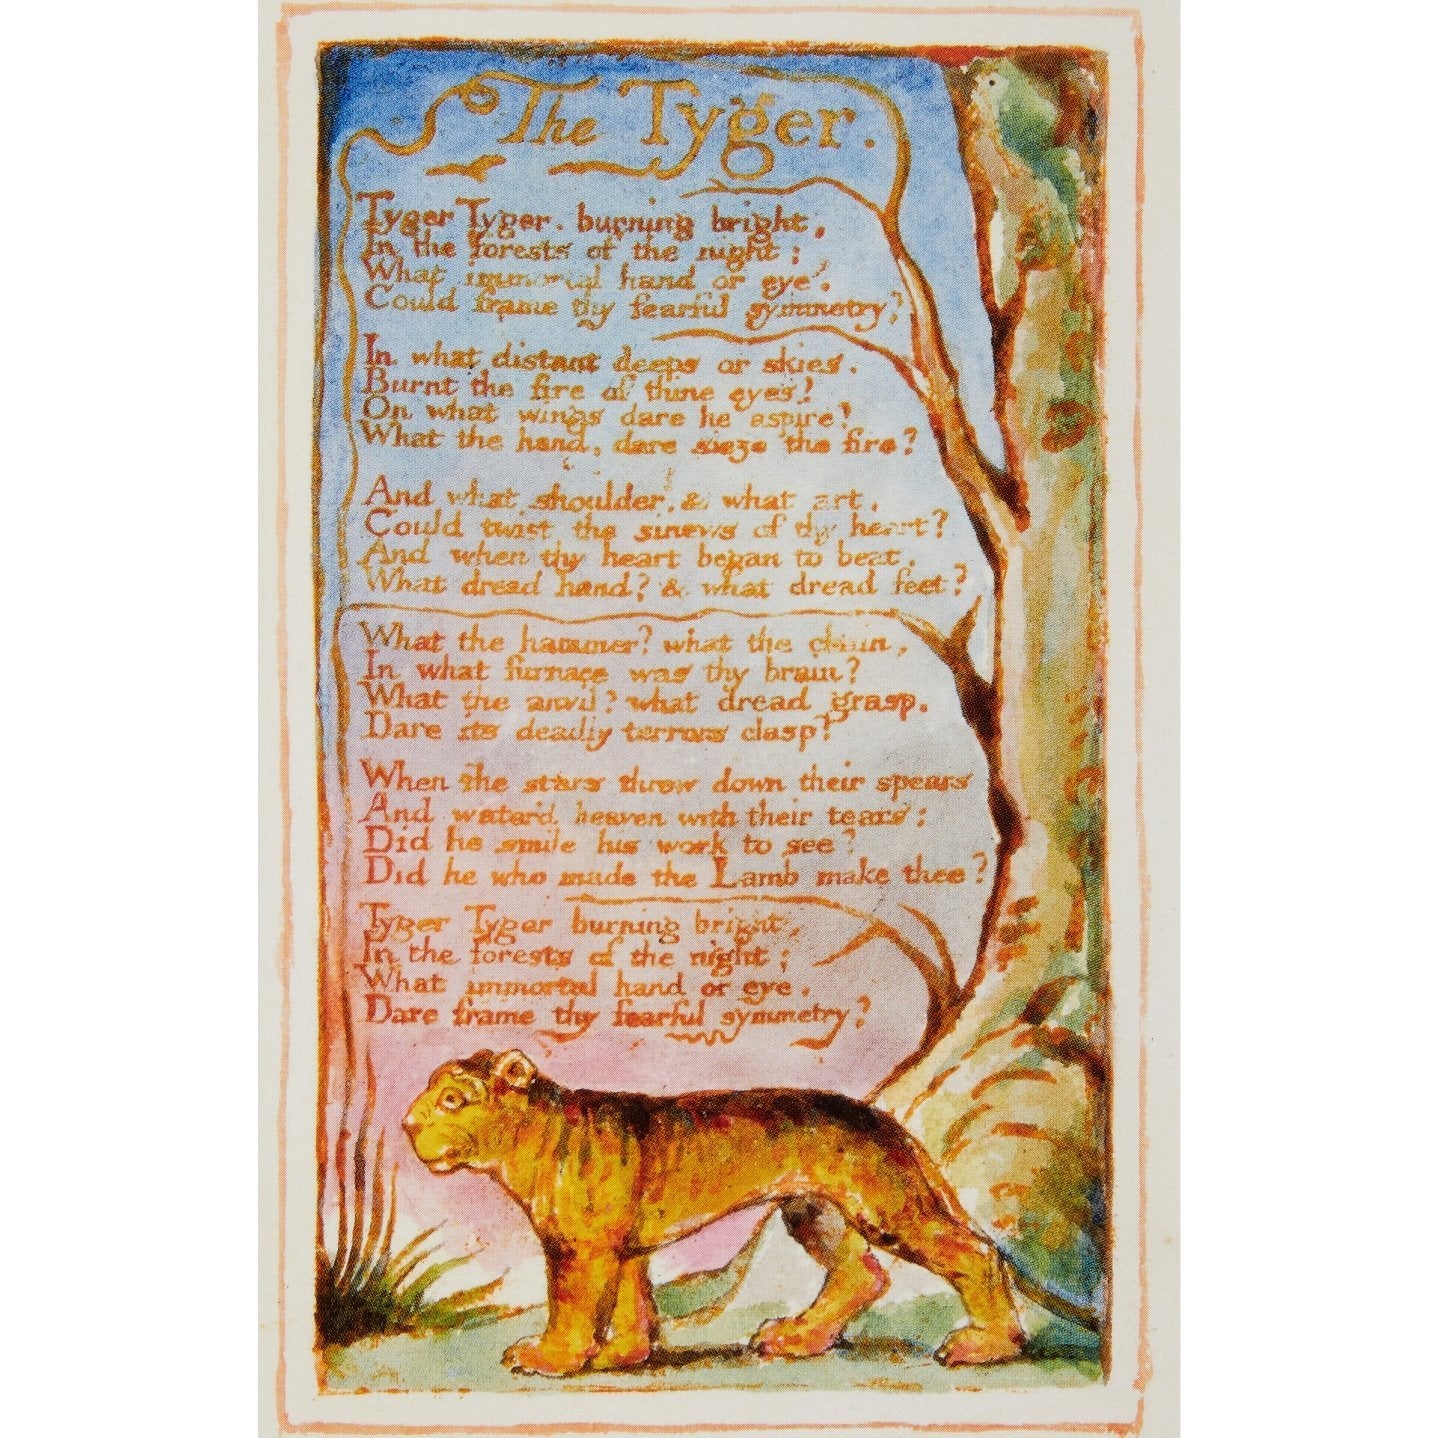 Notecard - The Tyger from Songs of Experience, by William Blake. From the Fitzwilliam Museum, brought to you by CuratingCambridge.co.uk